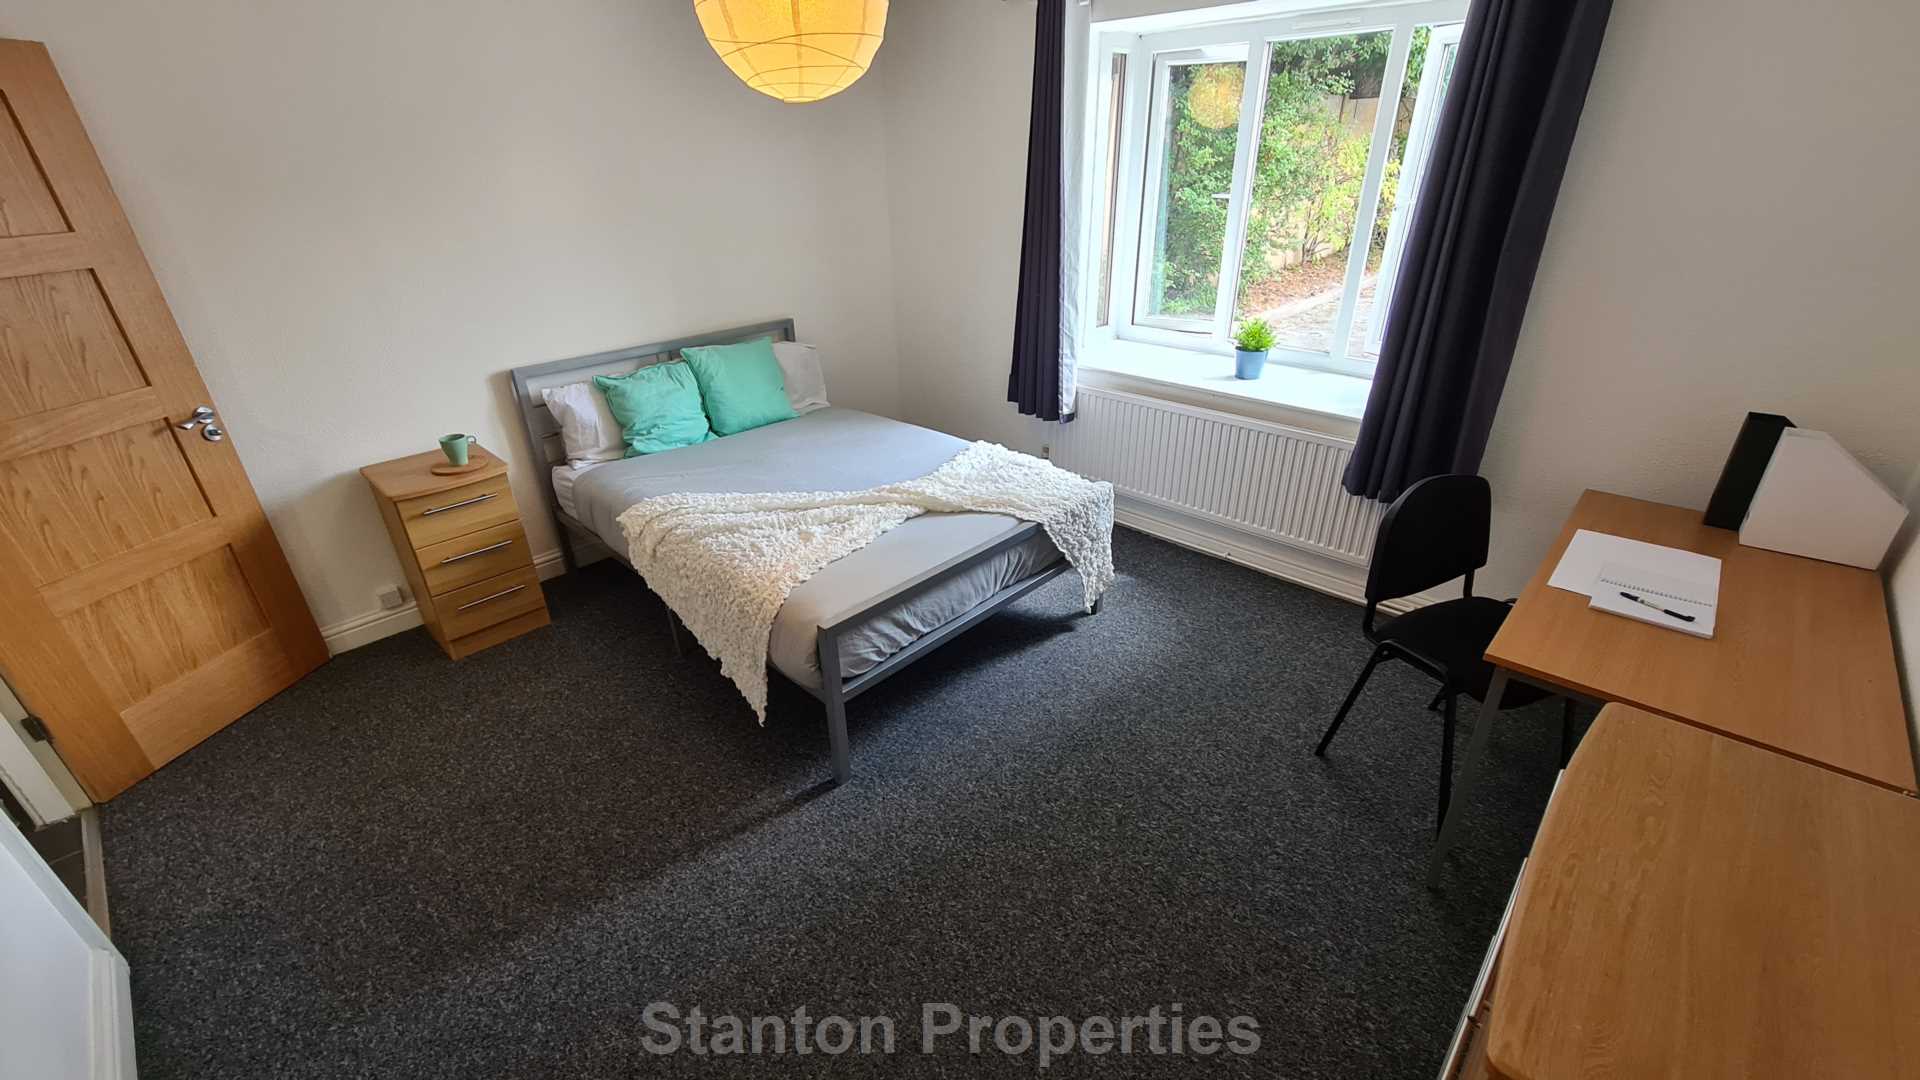 £155 pppw, See Video Tour, Granville Road, Fallowfield, Image 24